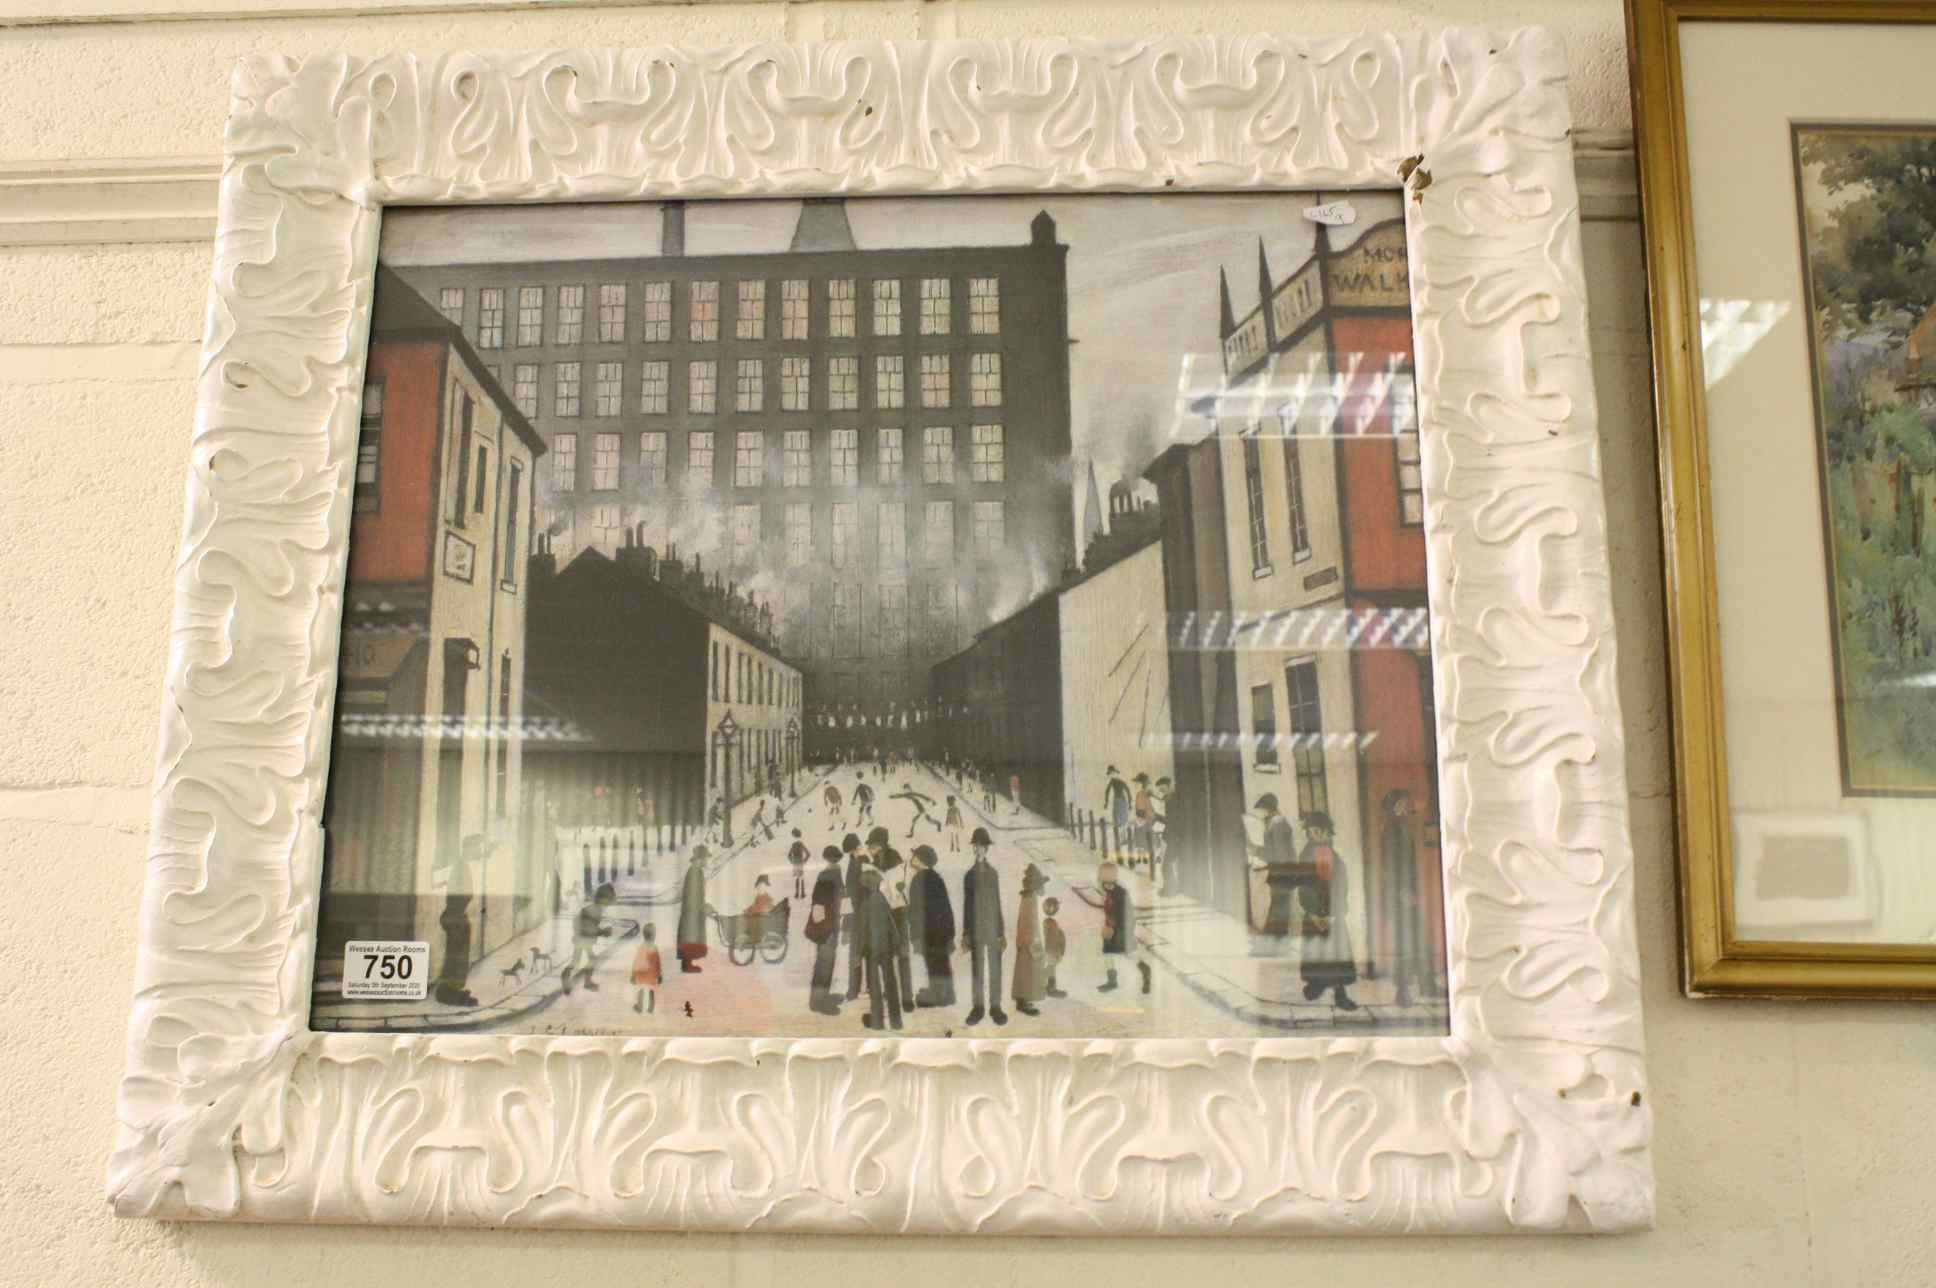 LS Lowry 1887-1976, a framed print, northern street scene with figures, 39 x 49cm